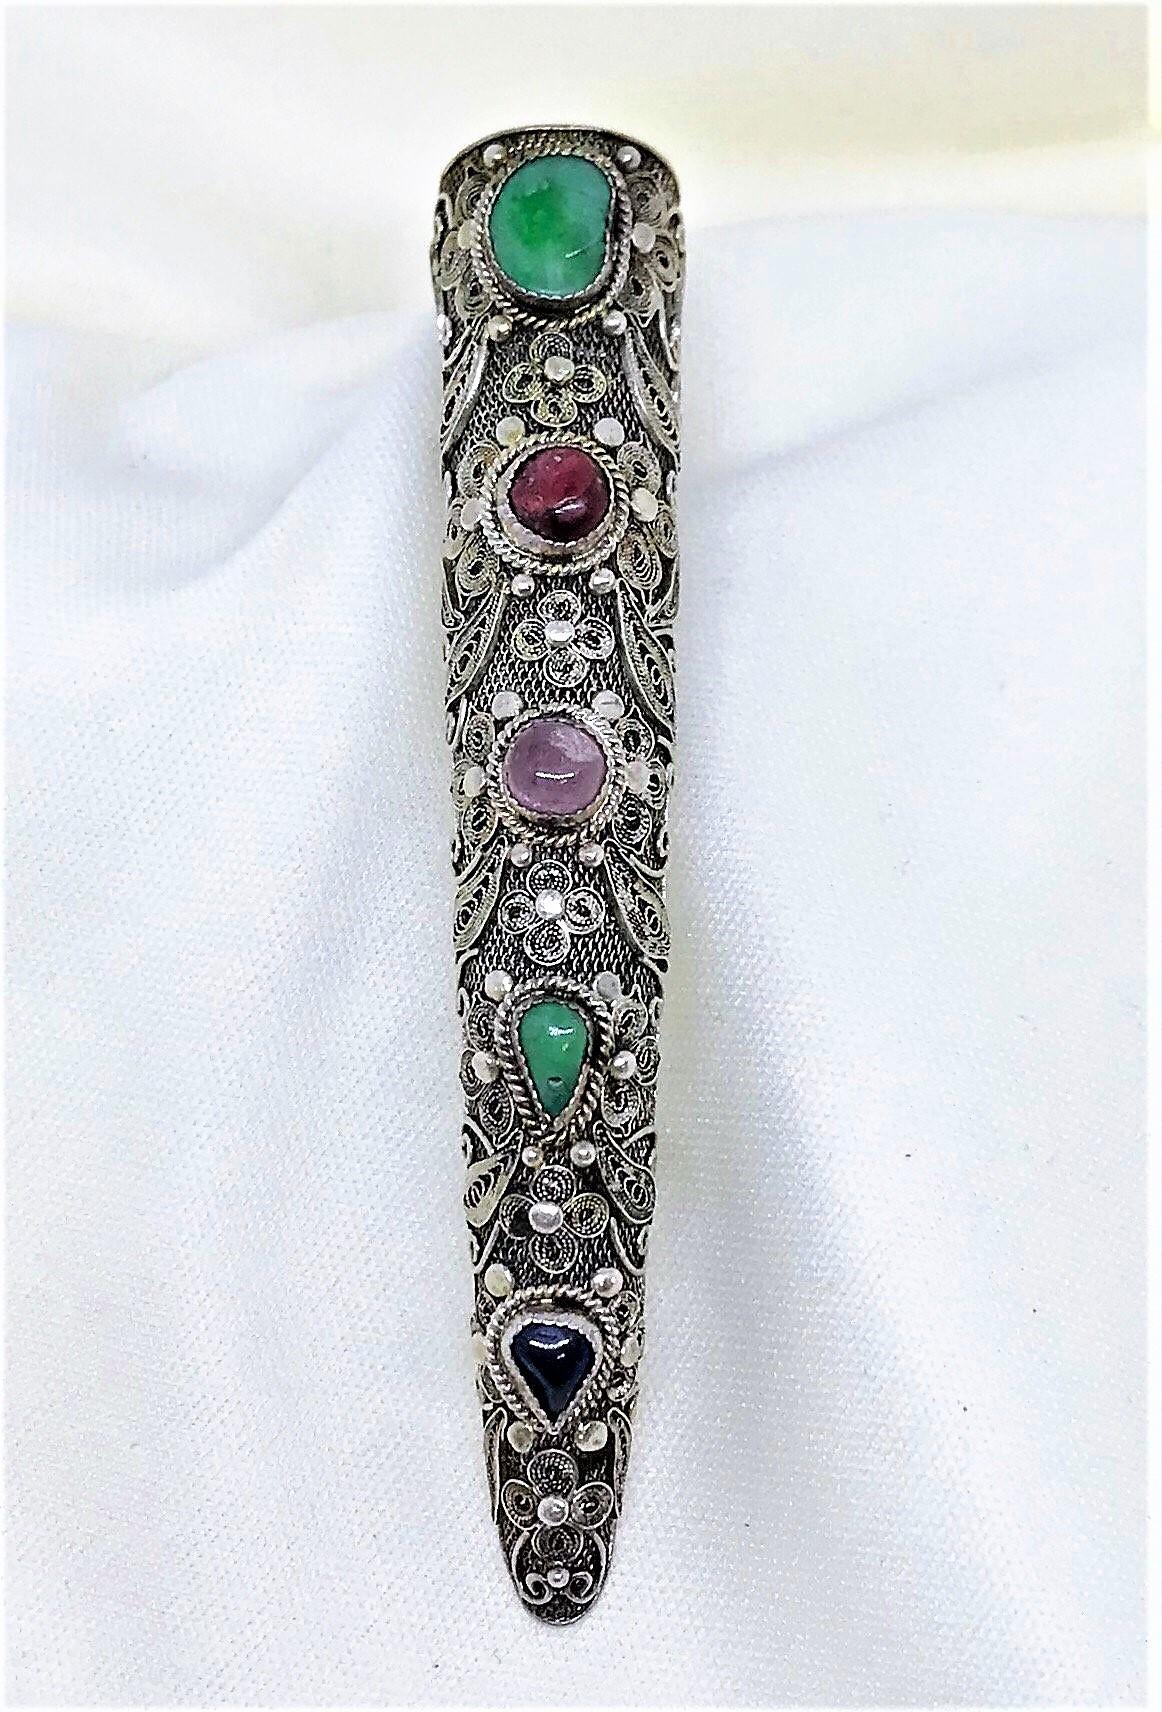 Circa 1930s Chinese Sterling Silver and Jade Nail Cover Brooch In Good Condition For Sale In Long Beach, CA